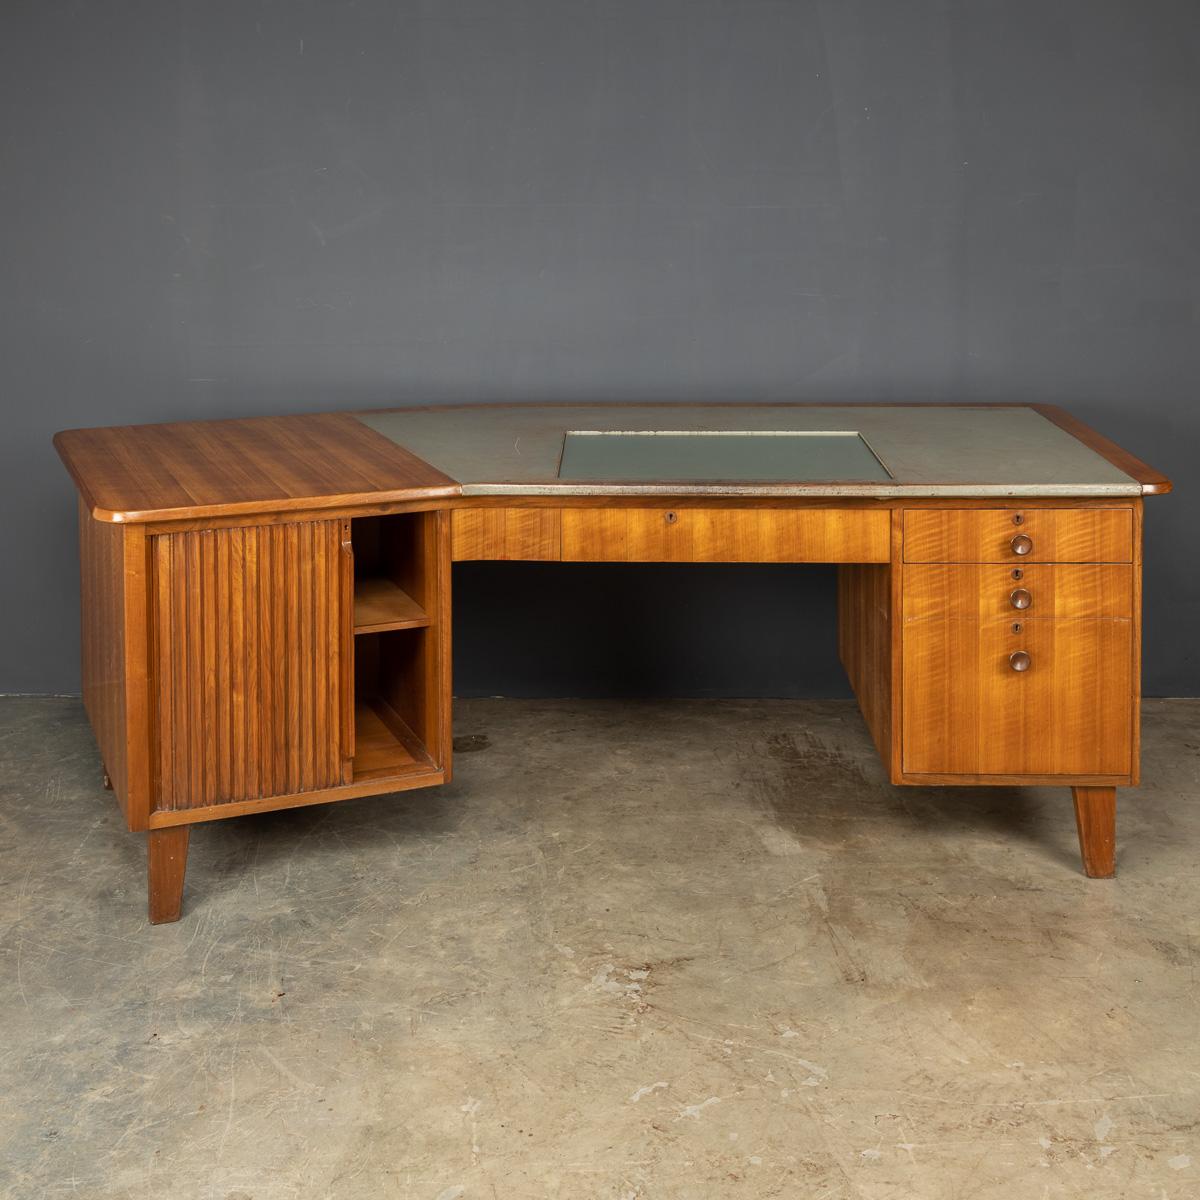 Iconic mid 20th Century Gordon Russell desk, walnut and mahogany studio desk, the unusually shaped top above drawers. Designed by Gordon Russell and sold through Heal's of London, c.1950.

CONDITION
In Great Condition - wear as